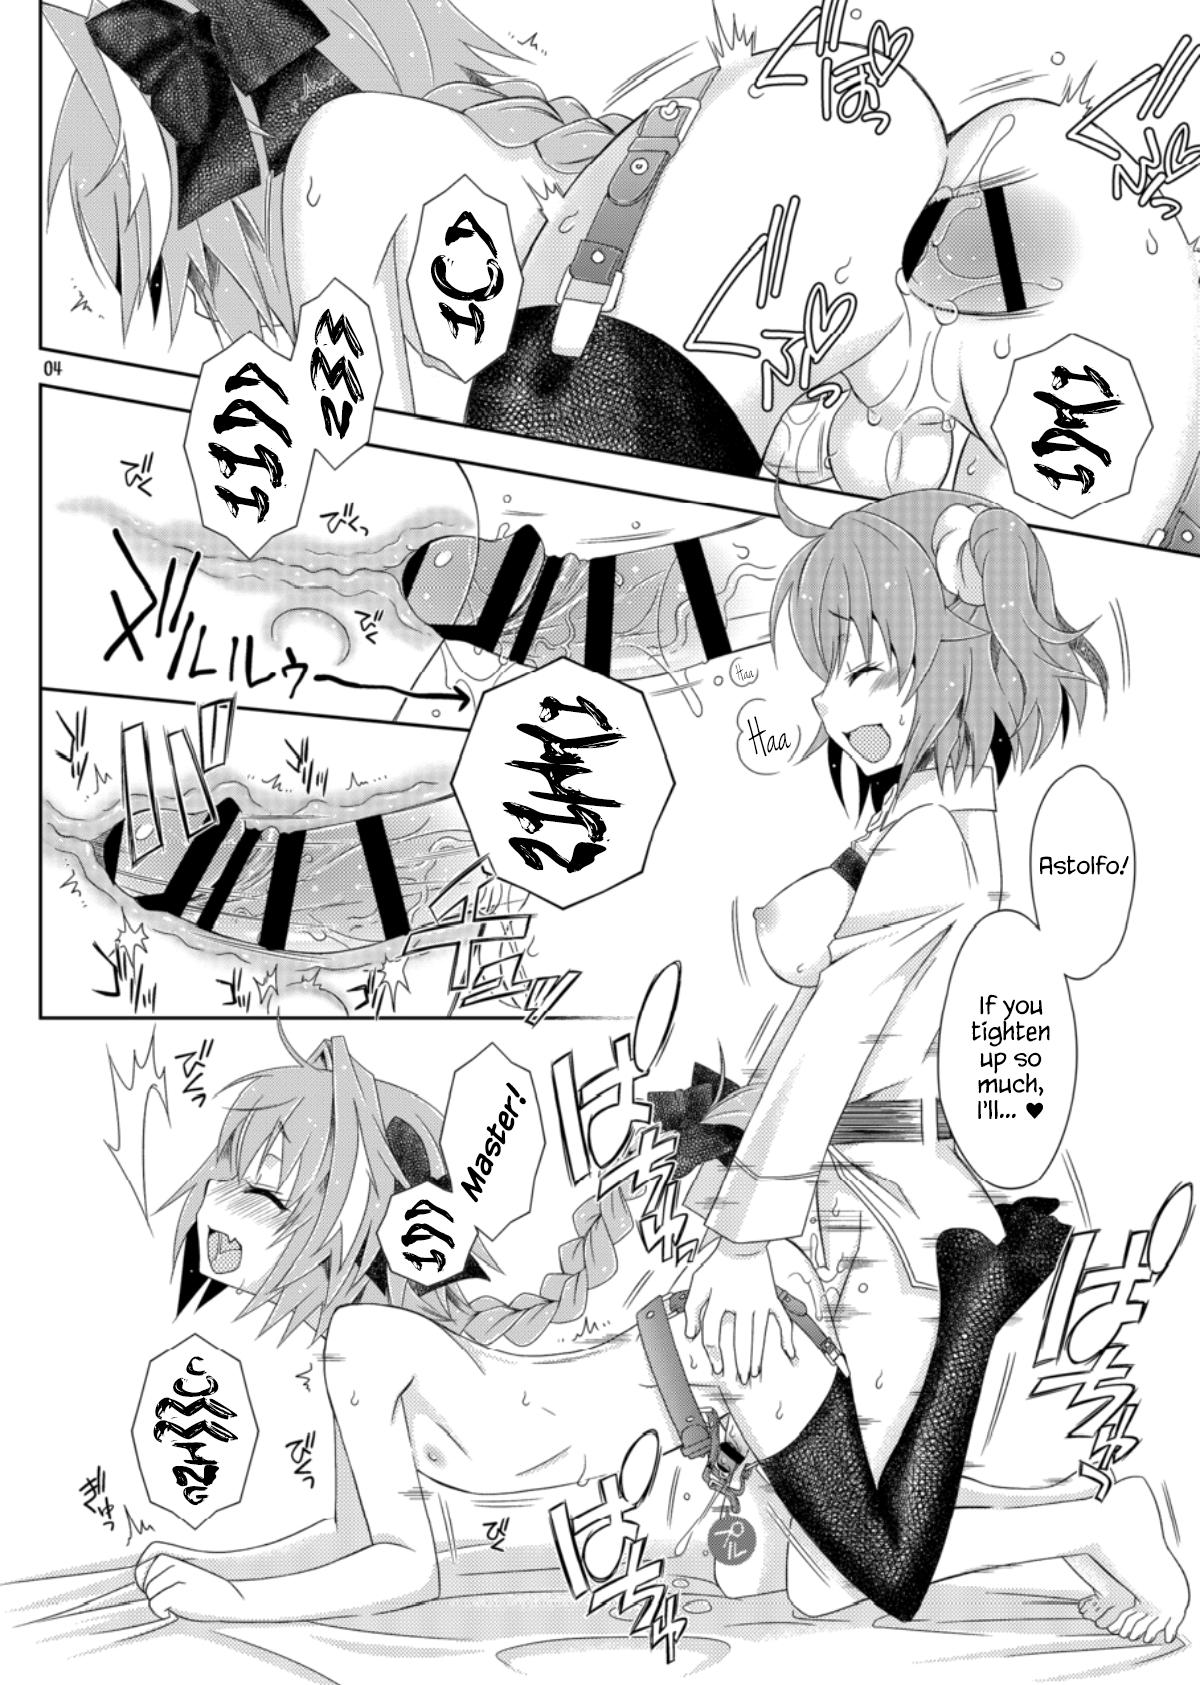 Mexico Gudako no ASS Onaho-chan - Fate grand order High Heels - Page 4